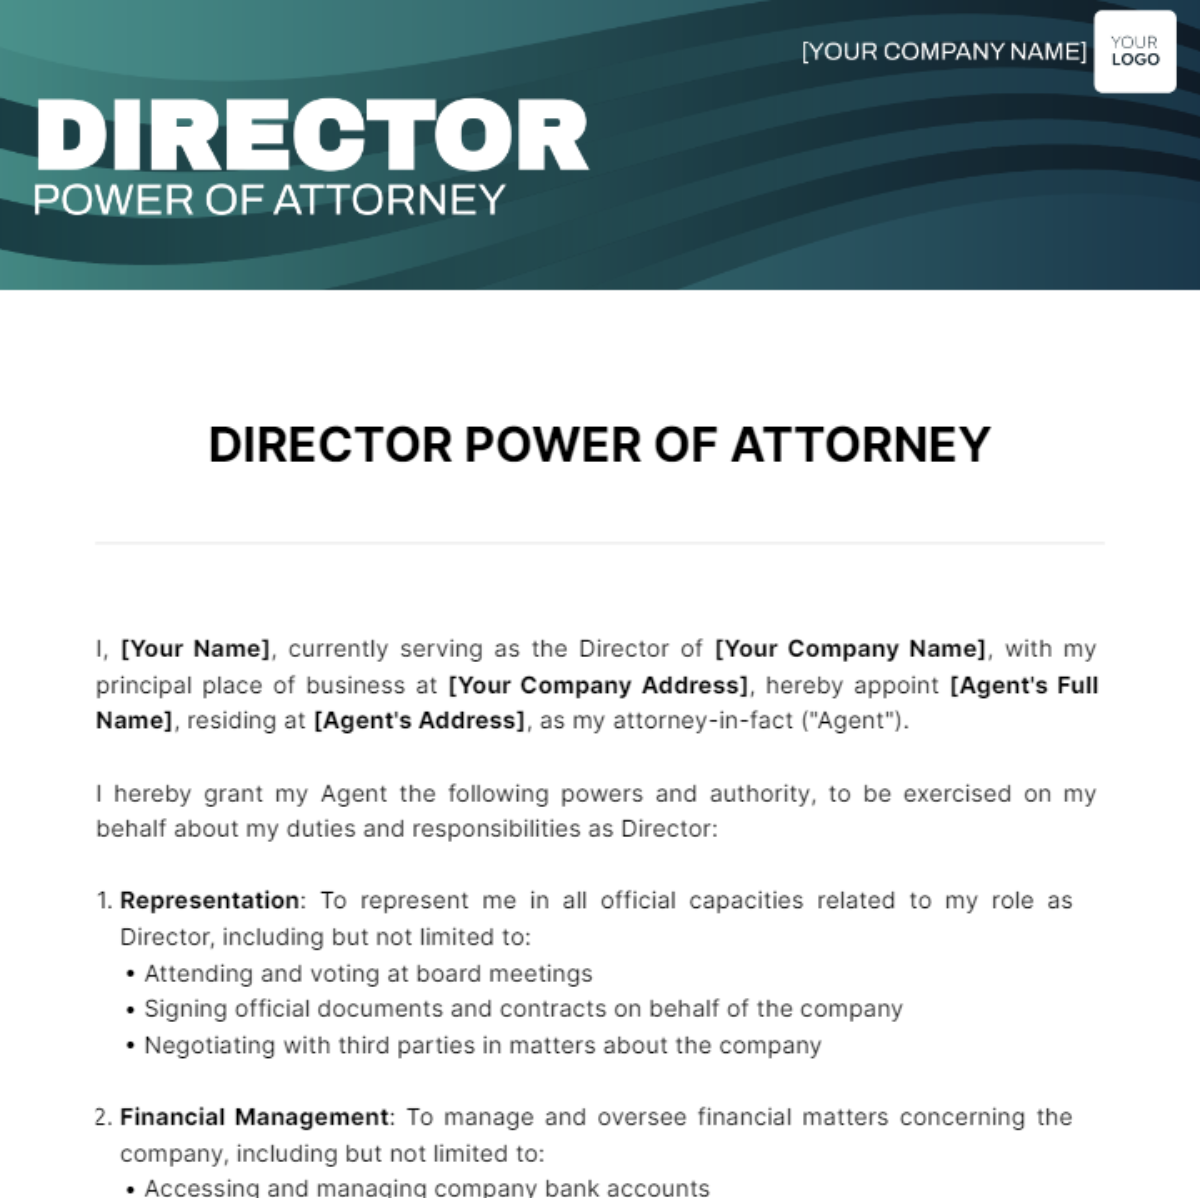 Director Power of Attorney Template